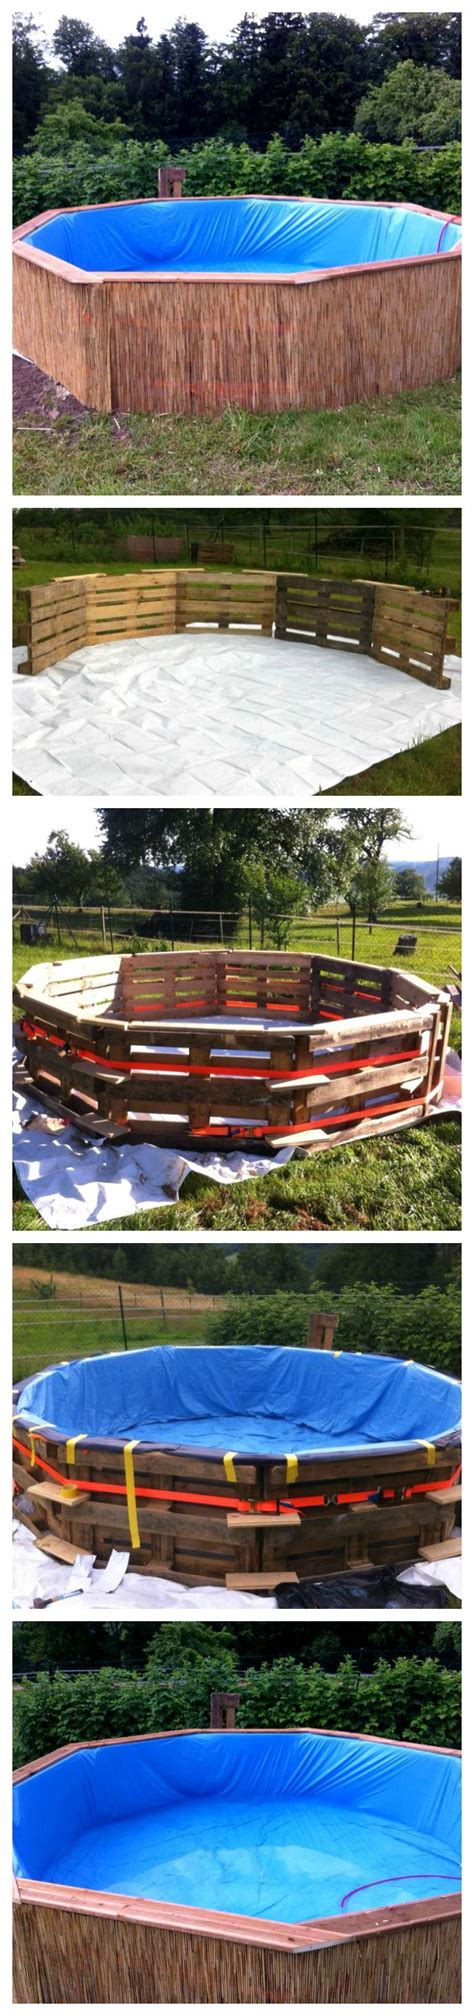 Make A Pool Out Of Pallets How Make Your Own Pallet Pool